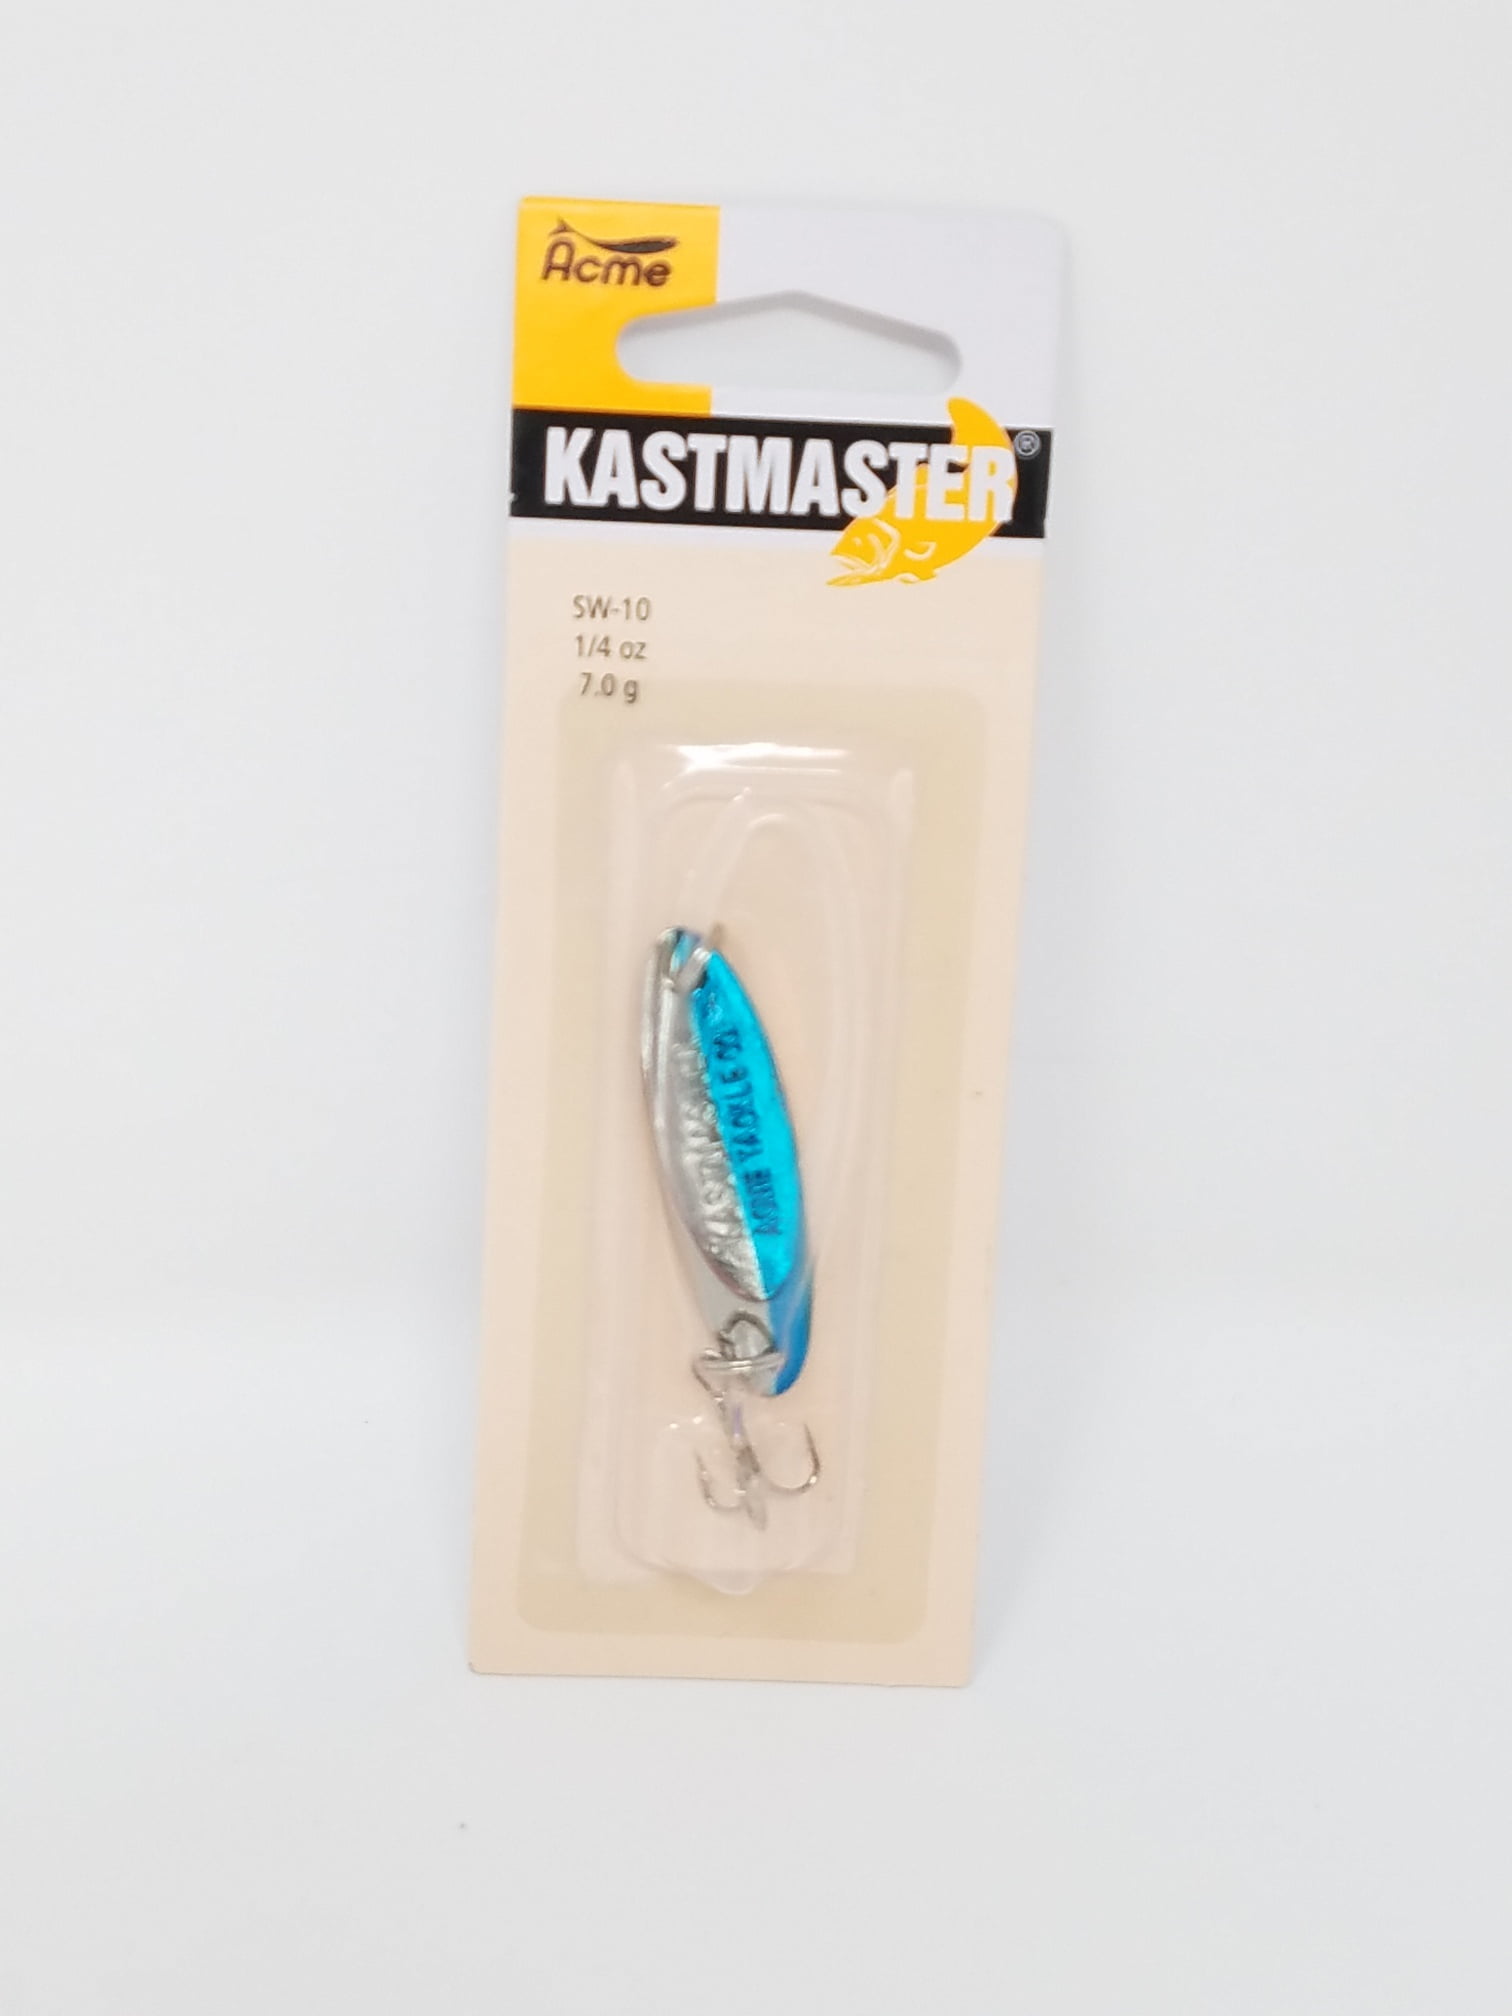 Acme Kastmaster with Tube Tail 2 oz Chrome/Fluorescent Red